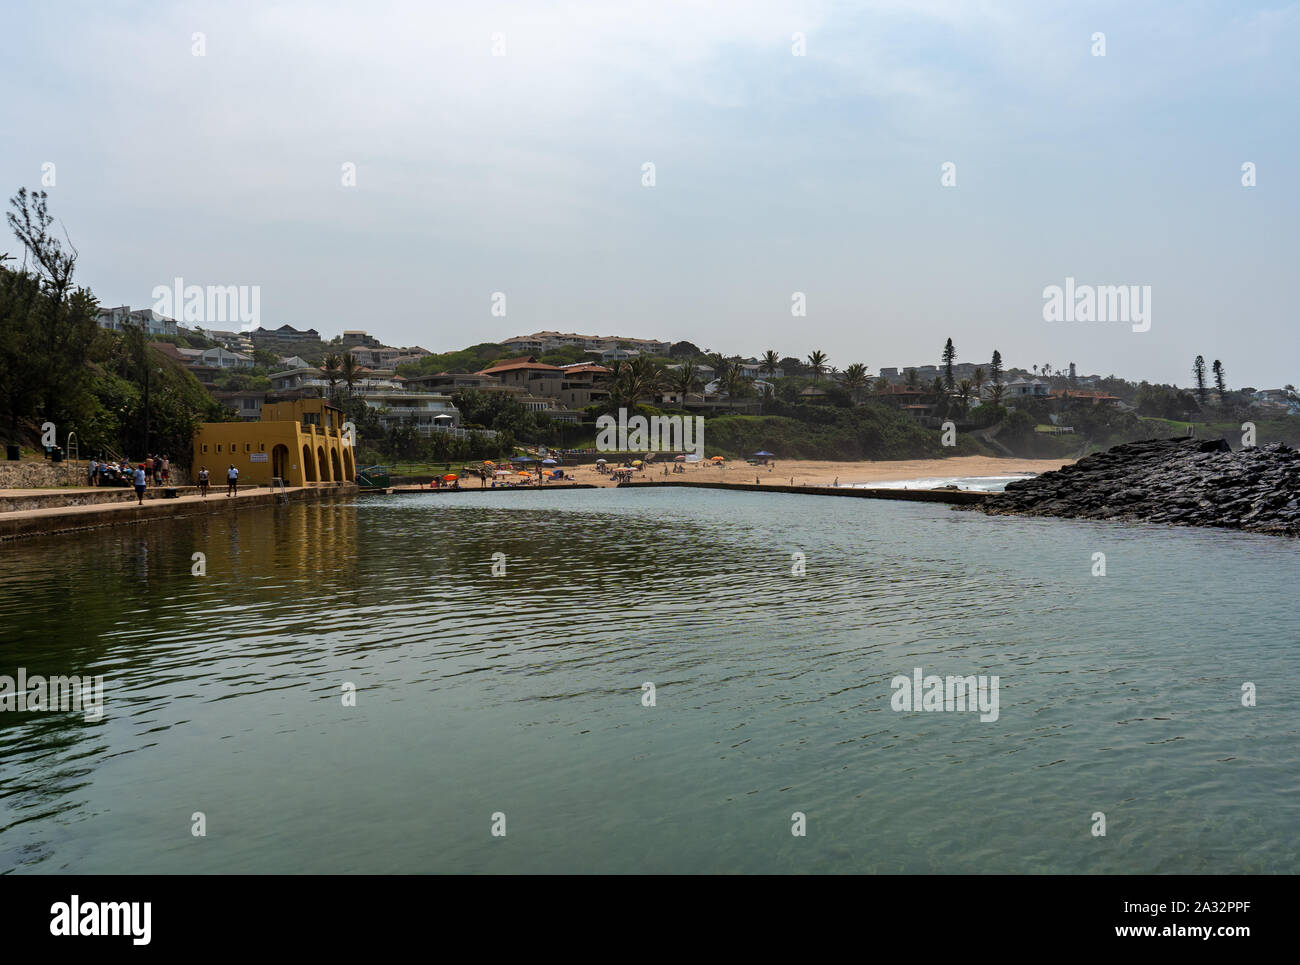 View of the rock pool and beach at Santorini on the Dolphin Coast in Durban South Africa Stock Photo